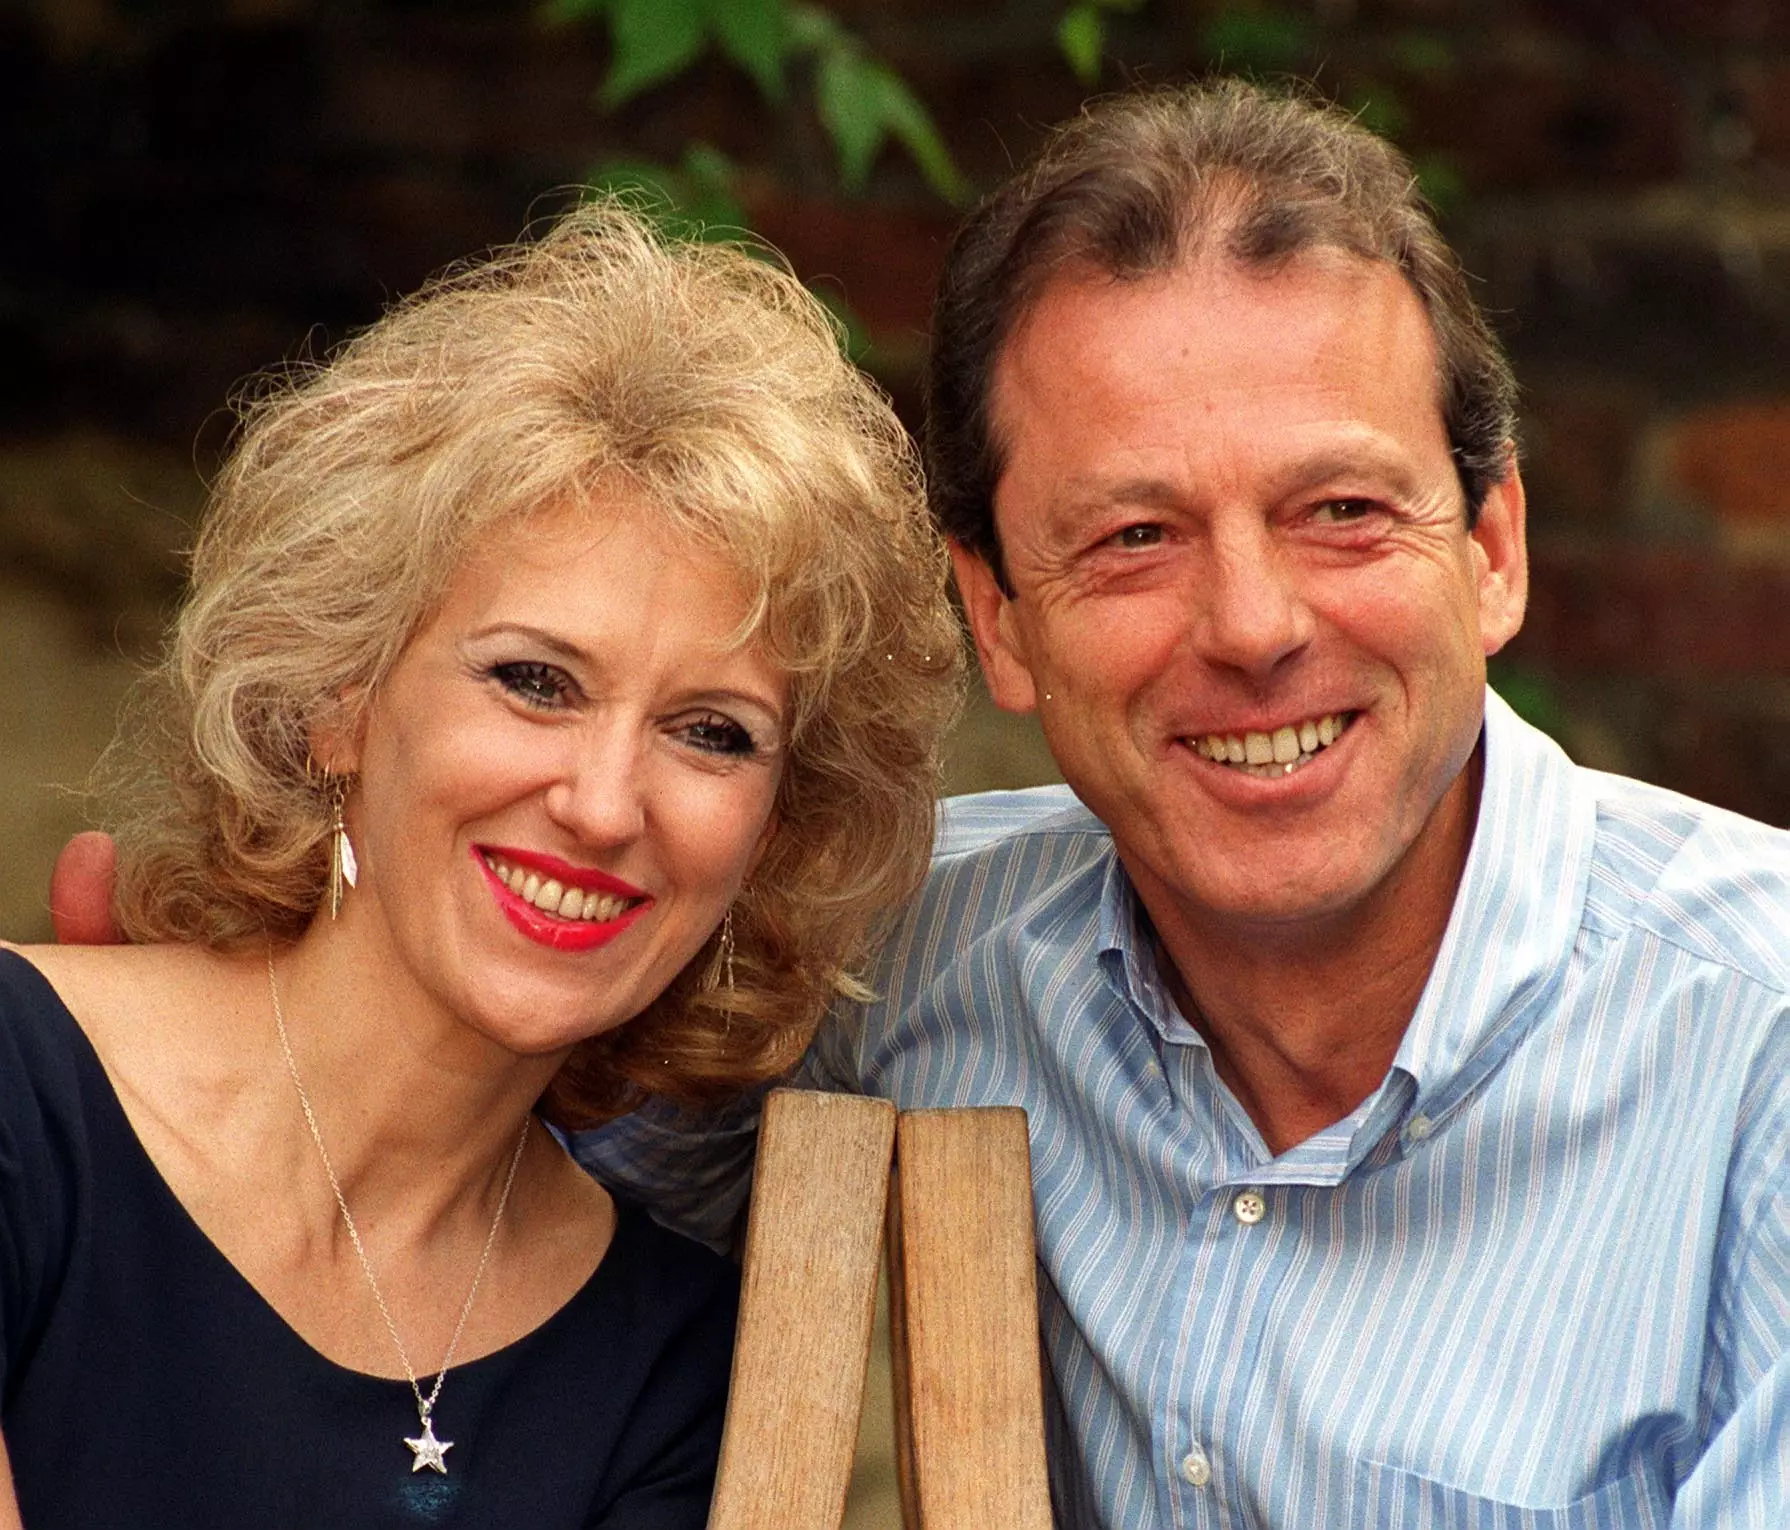 Anita Dobson and Leslie Grantham, who came to fame as pub landlords Den and Angie Watts.